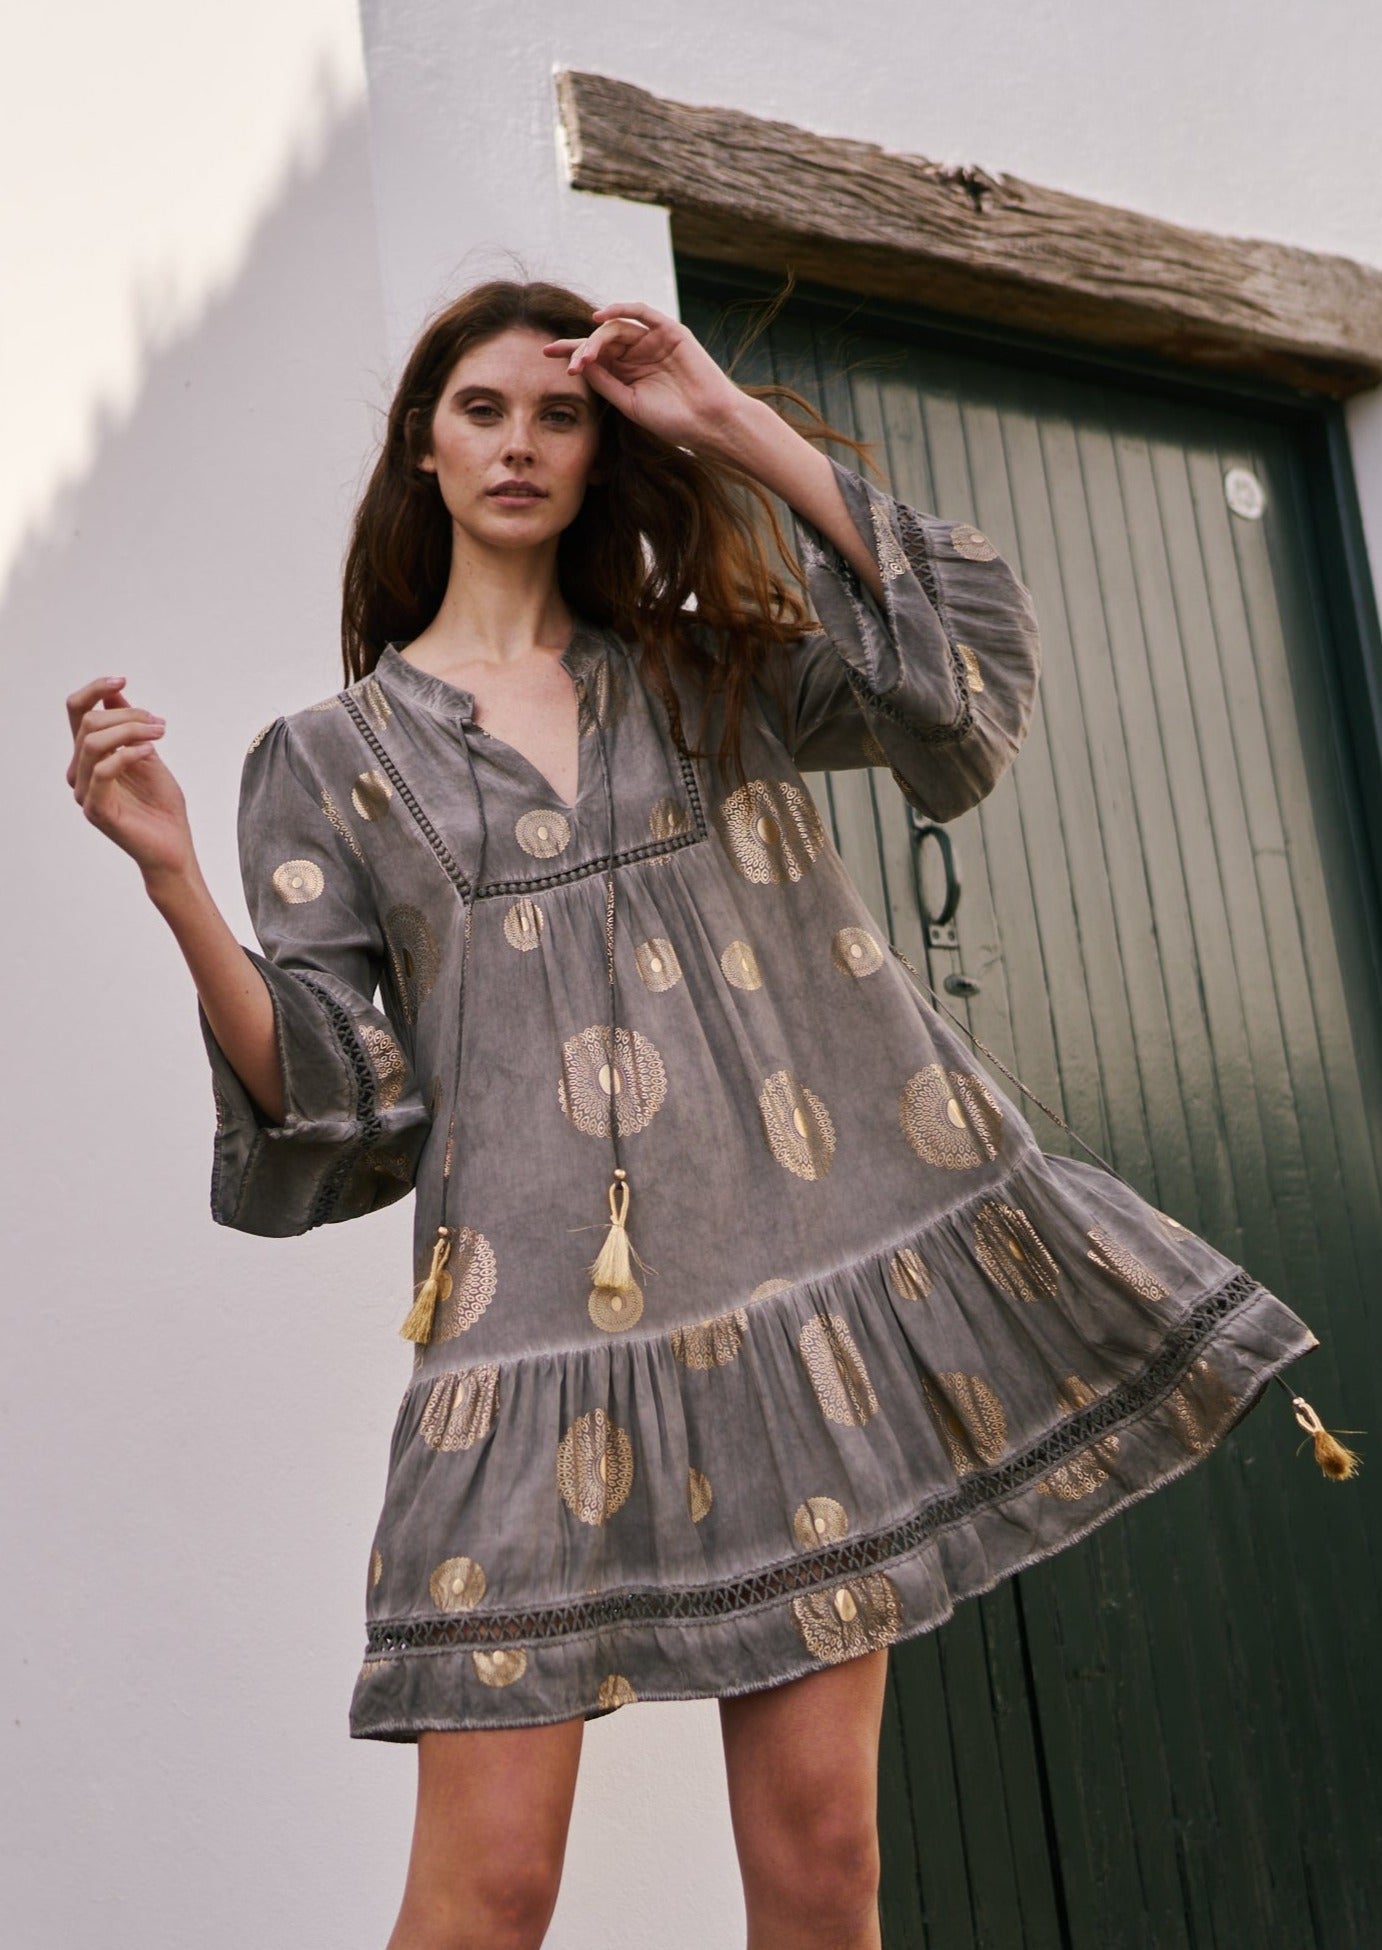 Short Bohemian Dress with Tassels in Stonewashed Grey with Gold Print - Tribute StoreTRIBUTE